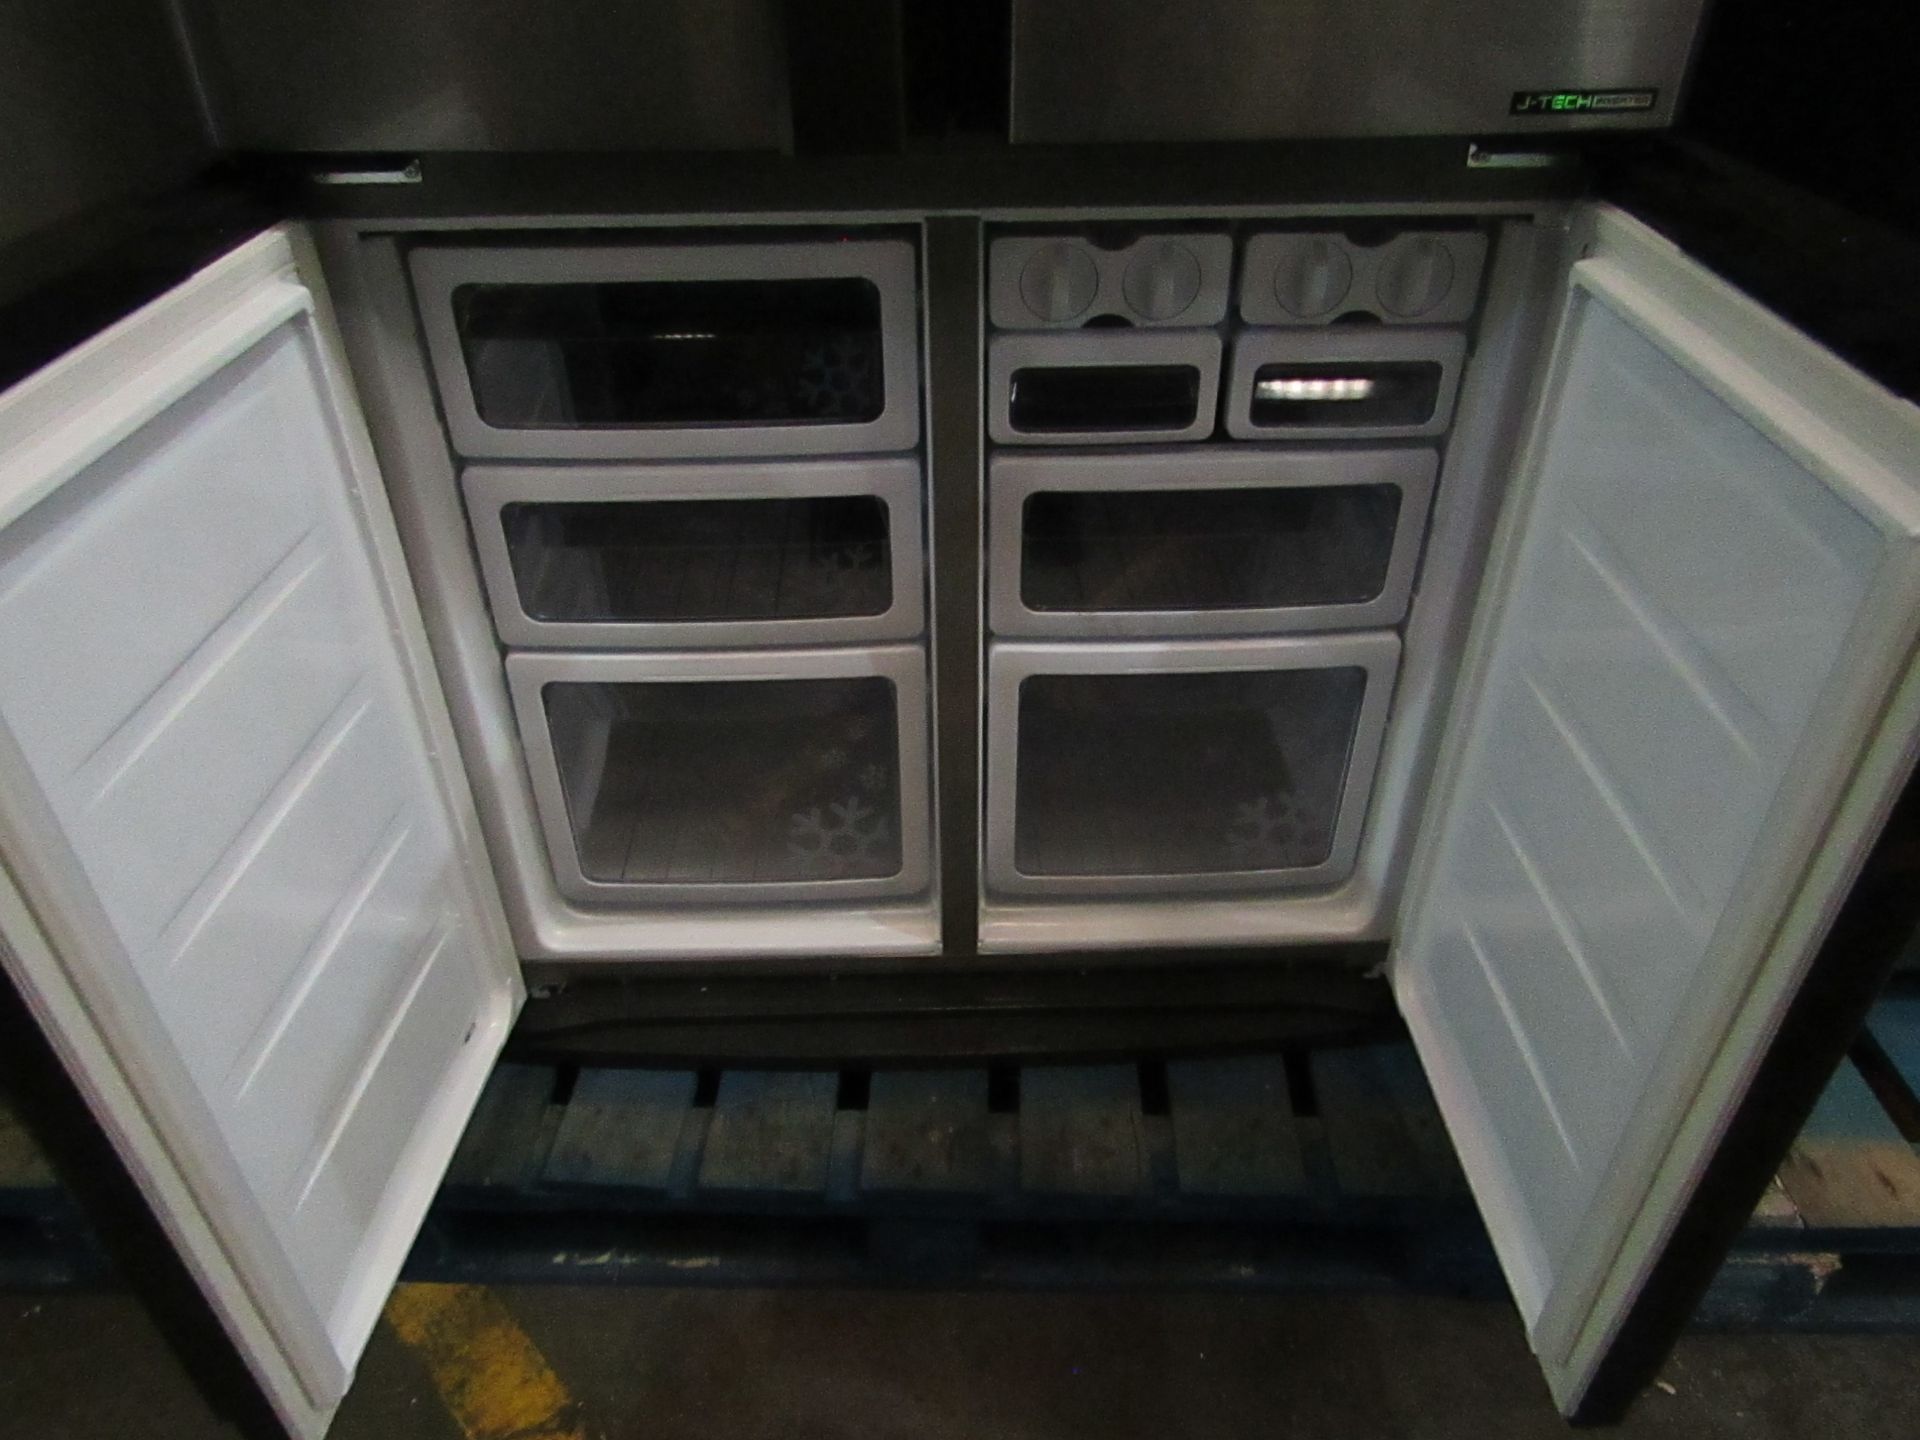 Sharp 4 door american fridge freezer, getting cold in both compartments when plugged in, has a - Image 4 of 4